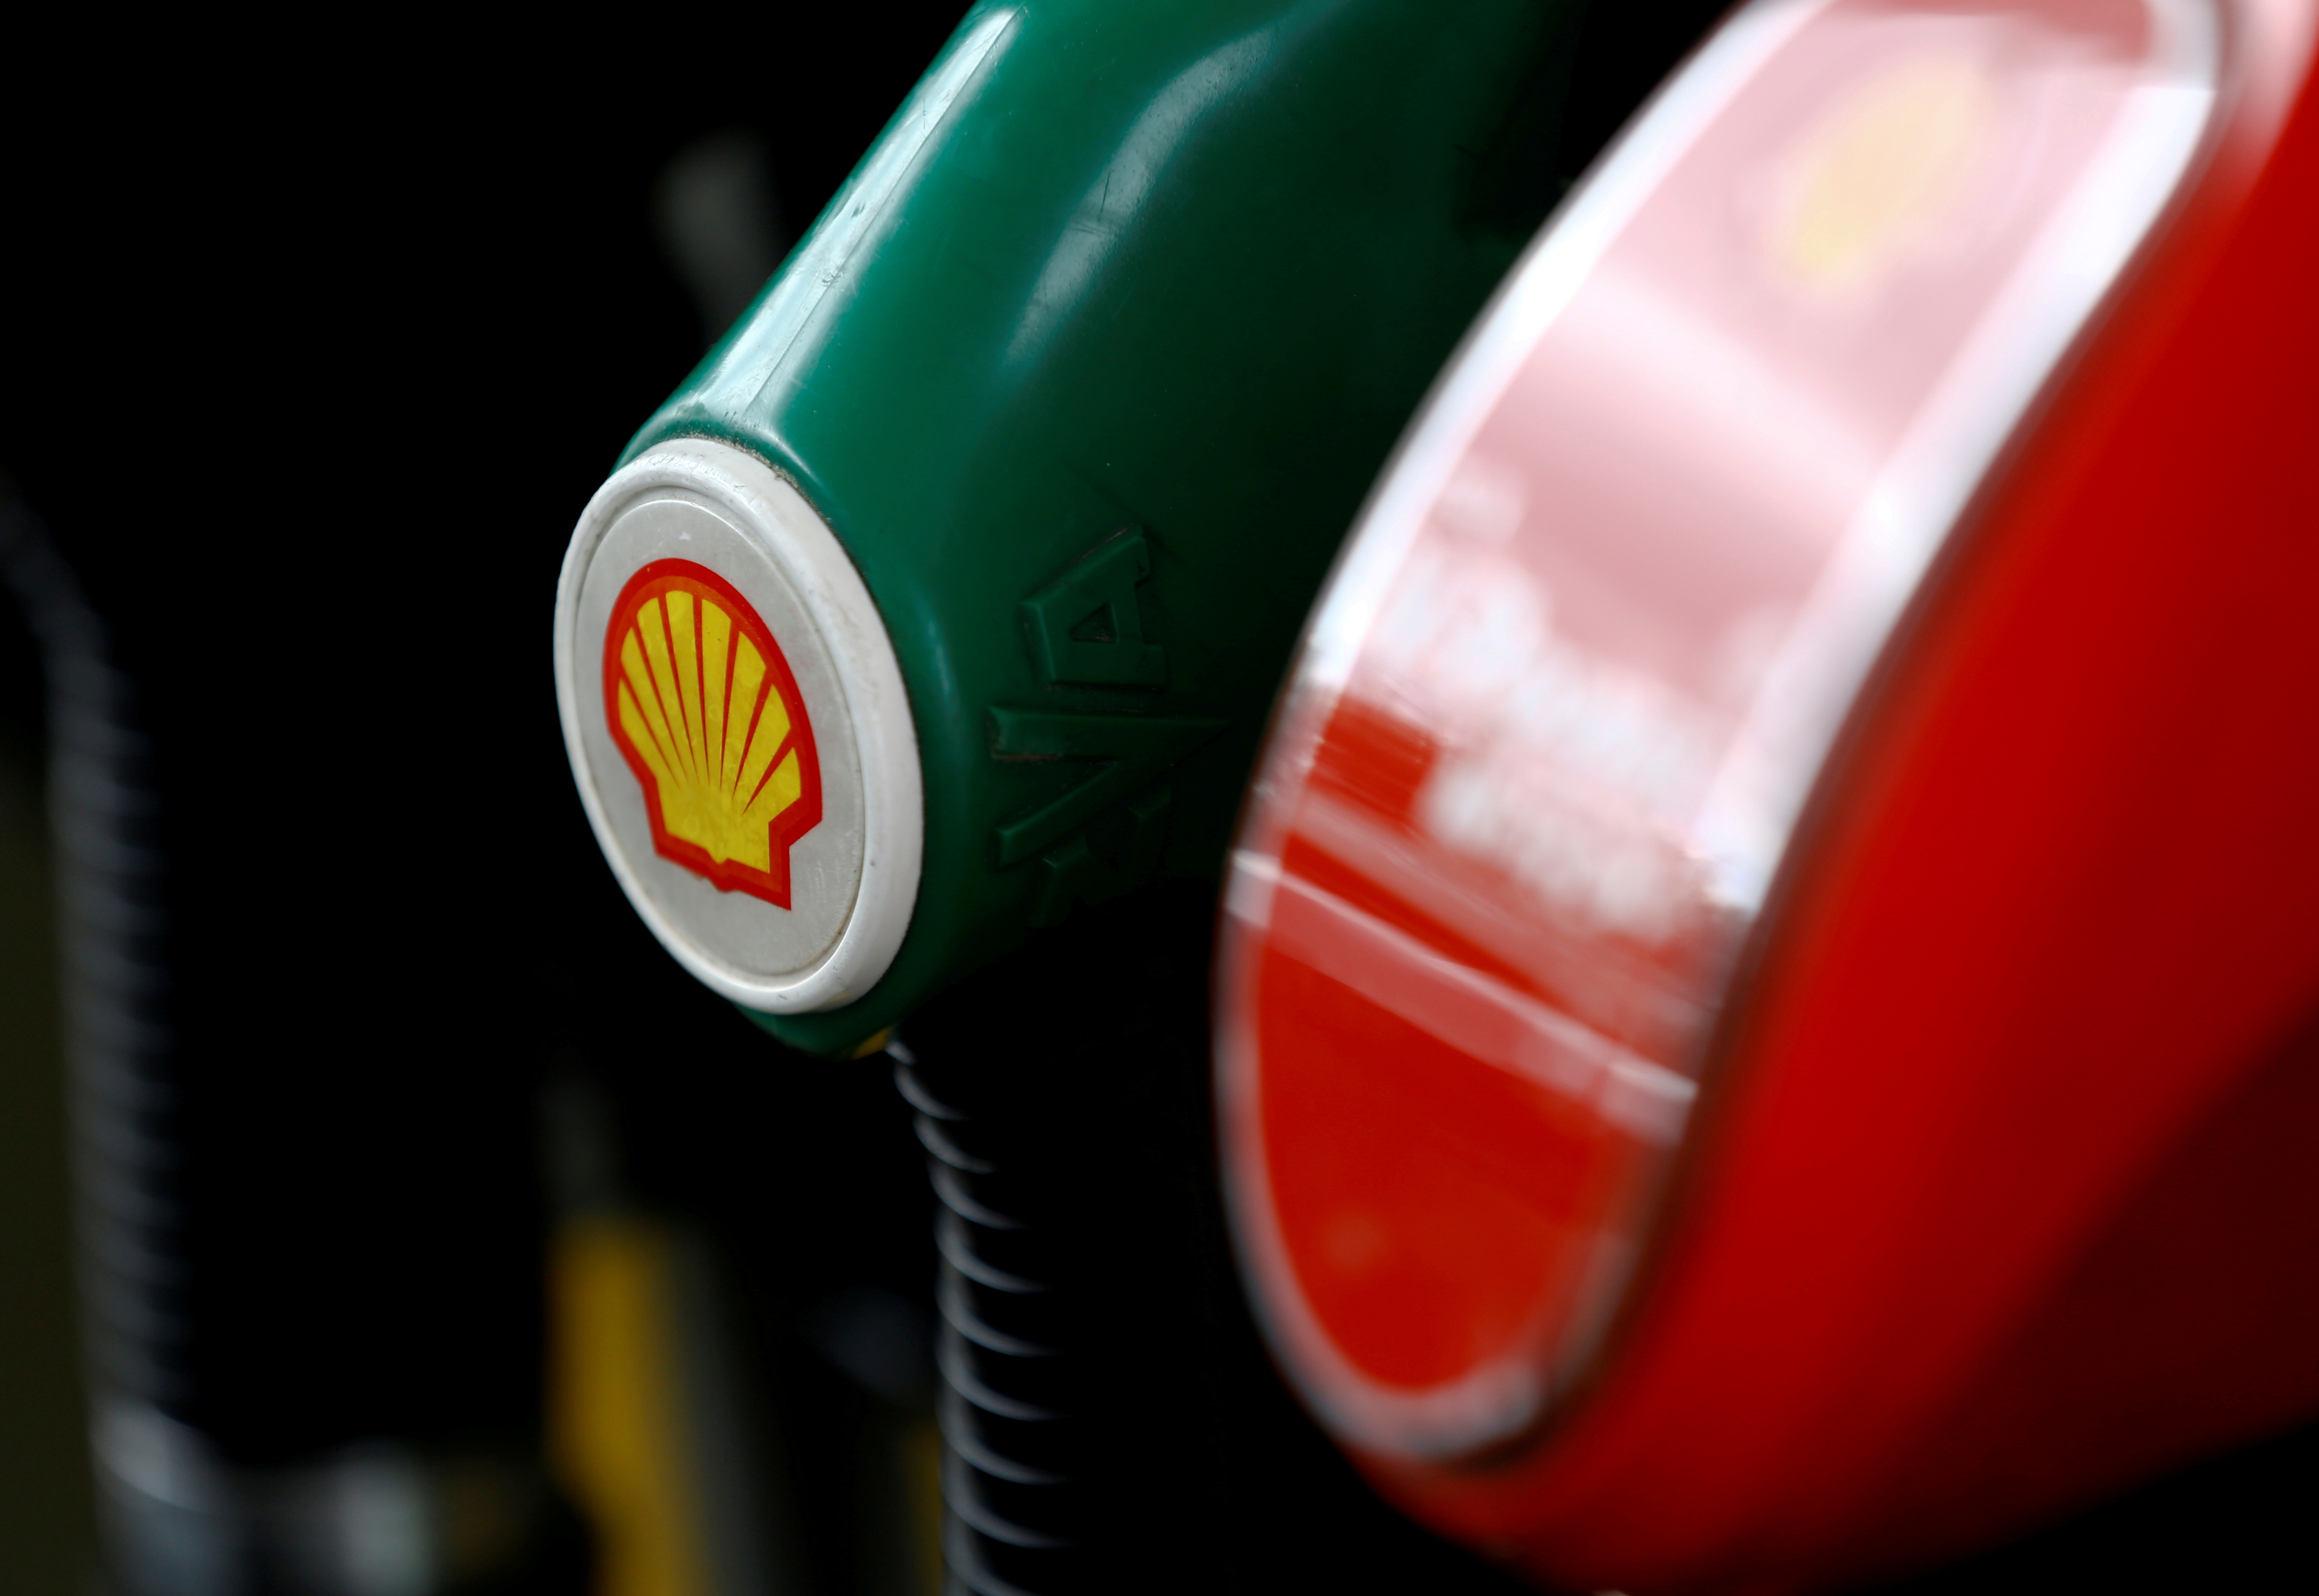 A Shell logo is seen on a fuel pump at a gas station In Warsaw, Poland